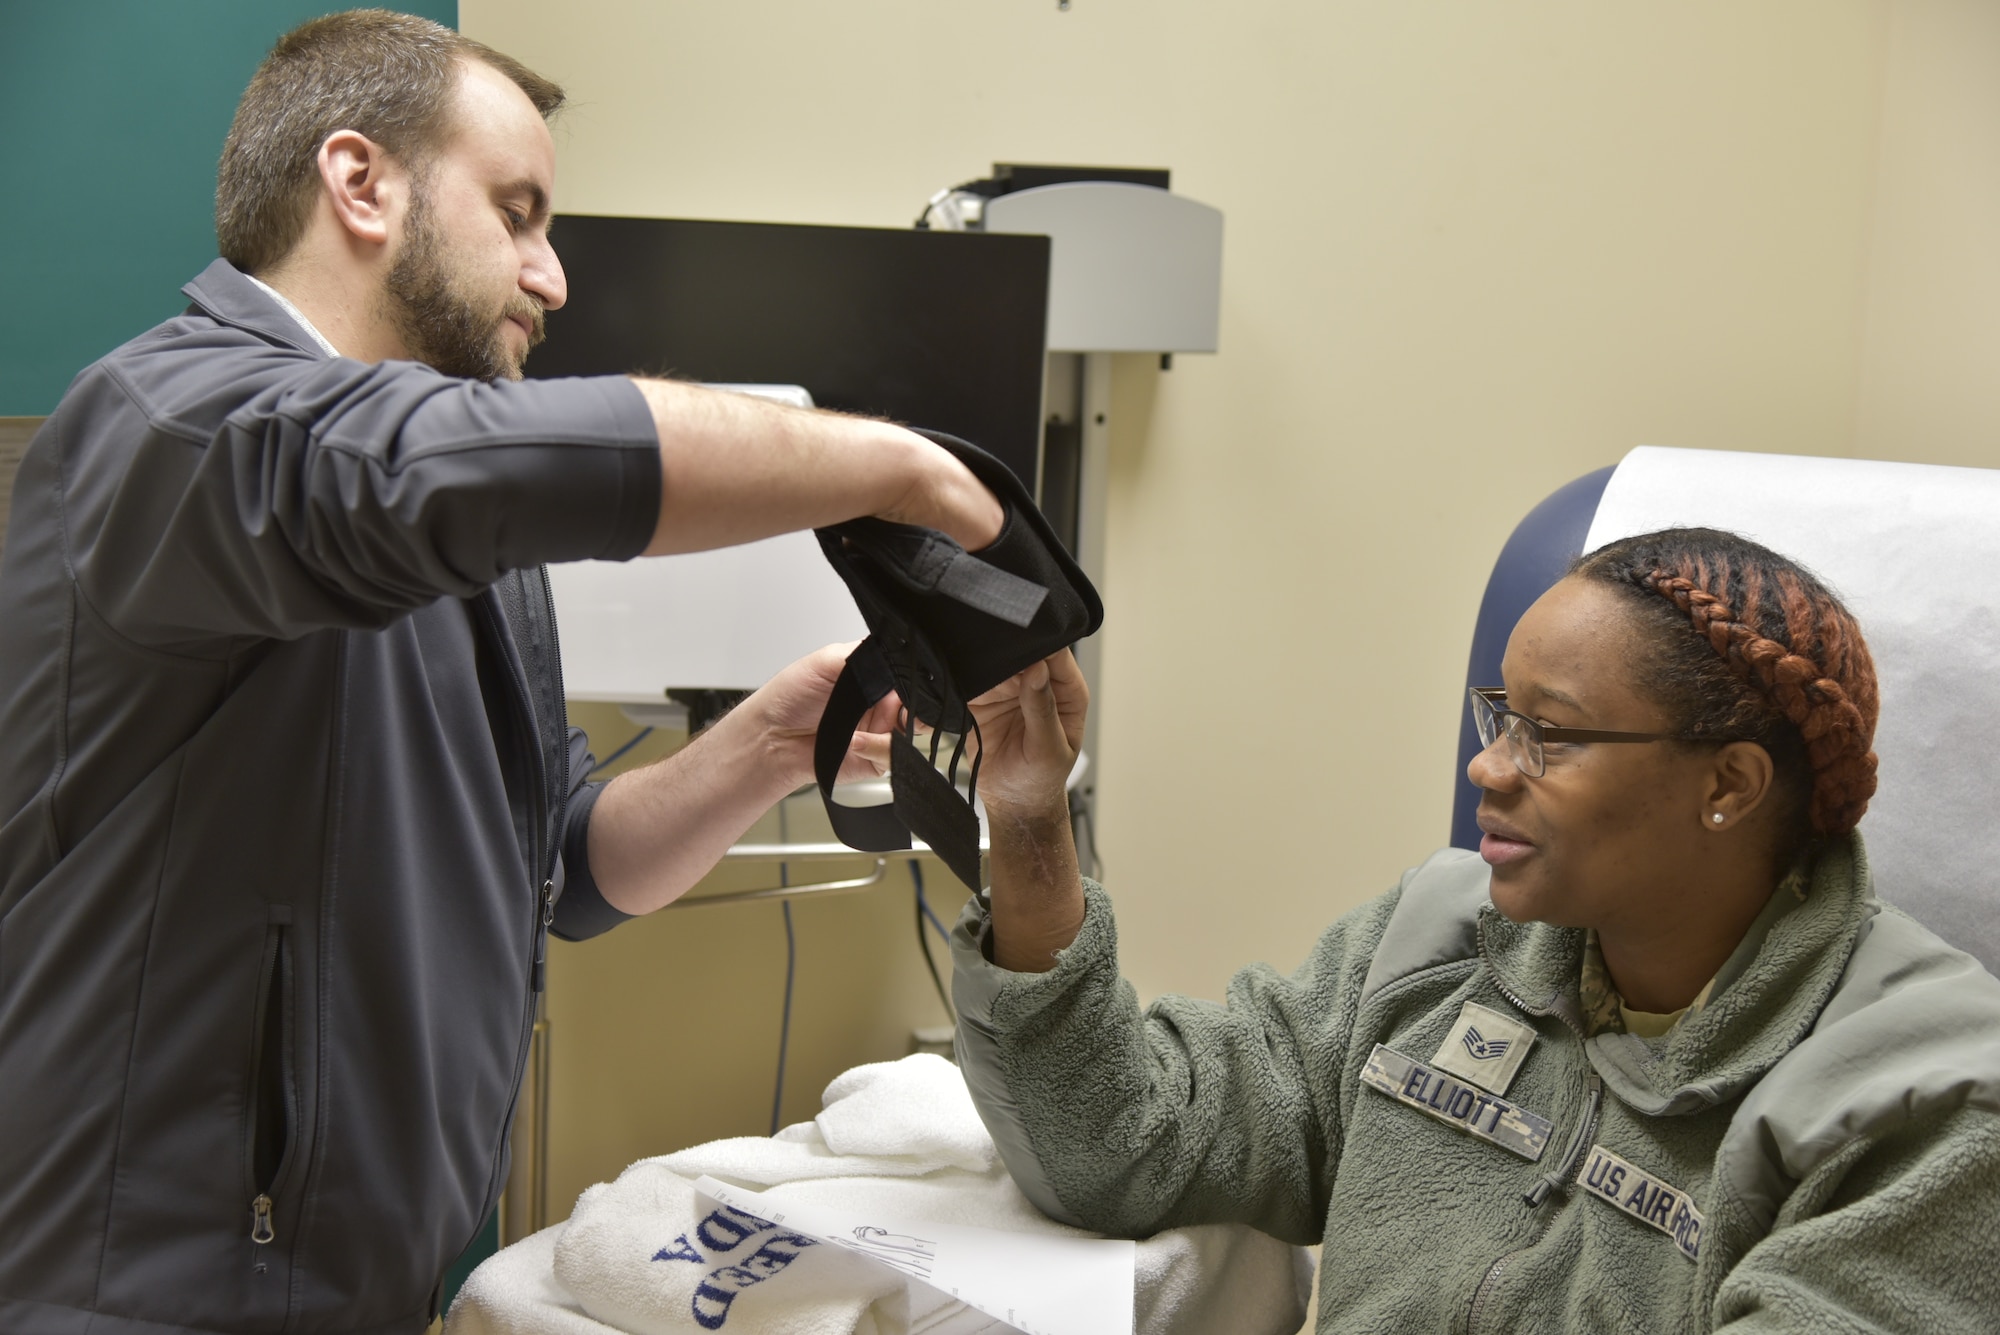 Mark Marsico, an occupational therapist at Walter Reed National Military Medical Center in Bethesda, Md., cares for a patient who has a wrist injury, March 28, 2019. (Department of Defense photo by Mark Oswell)